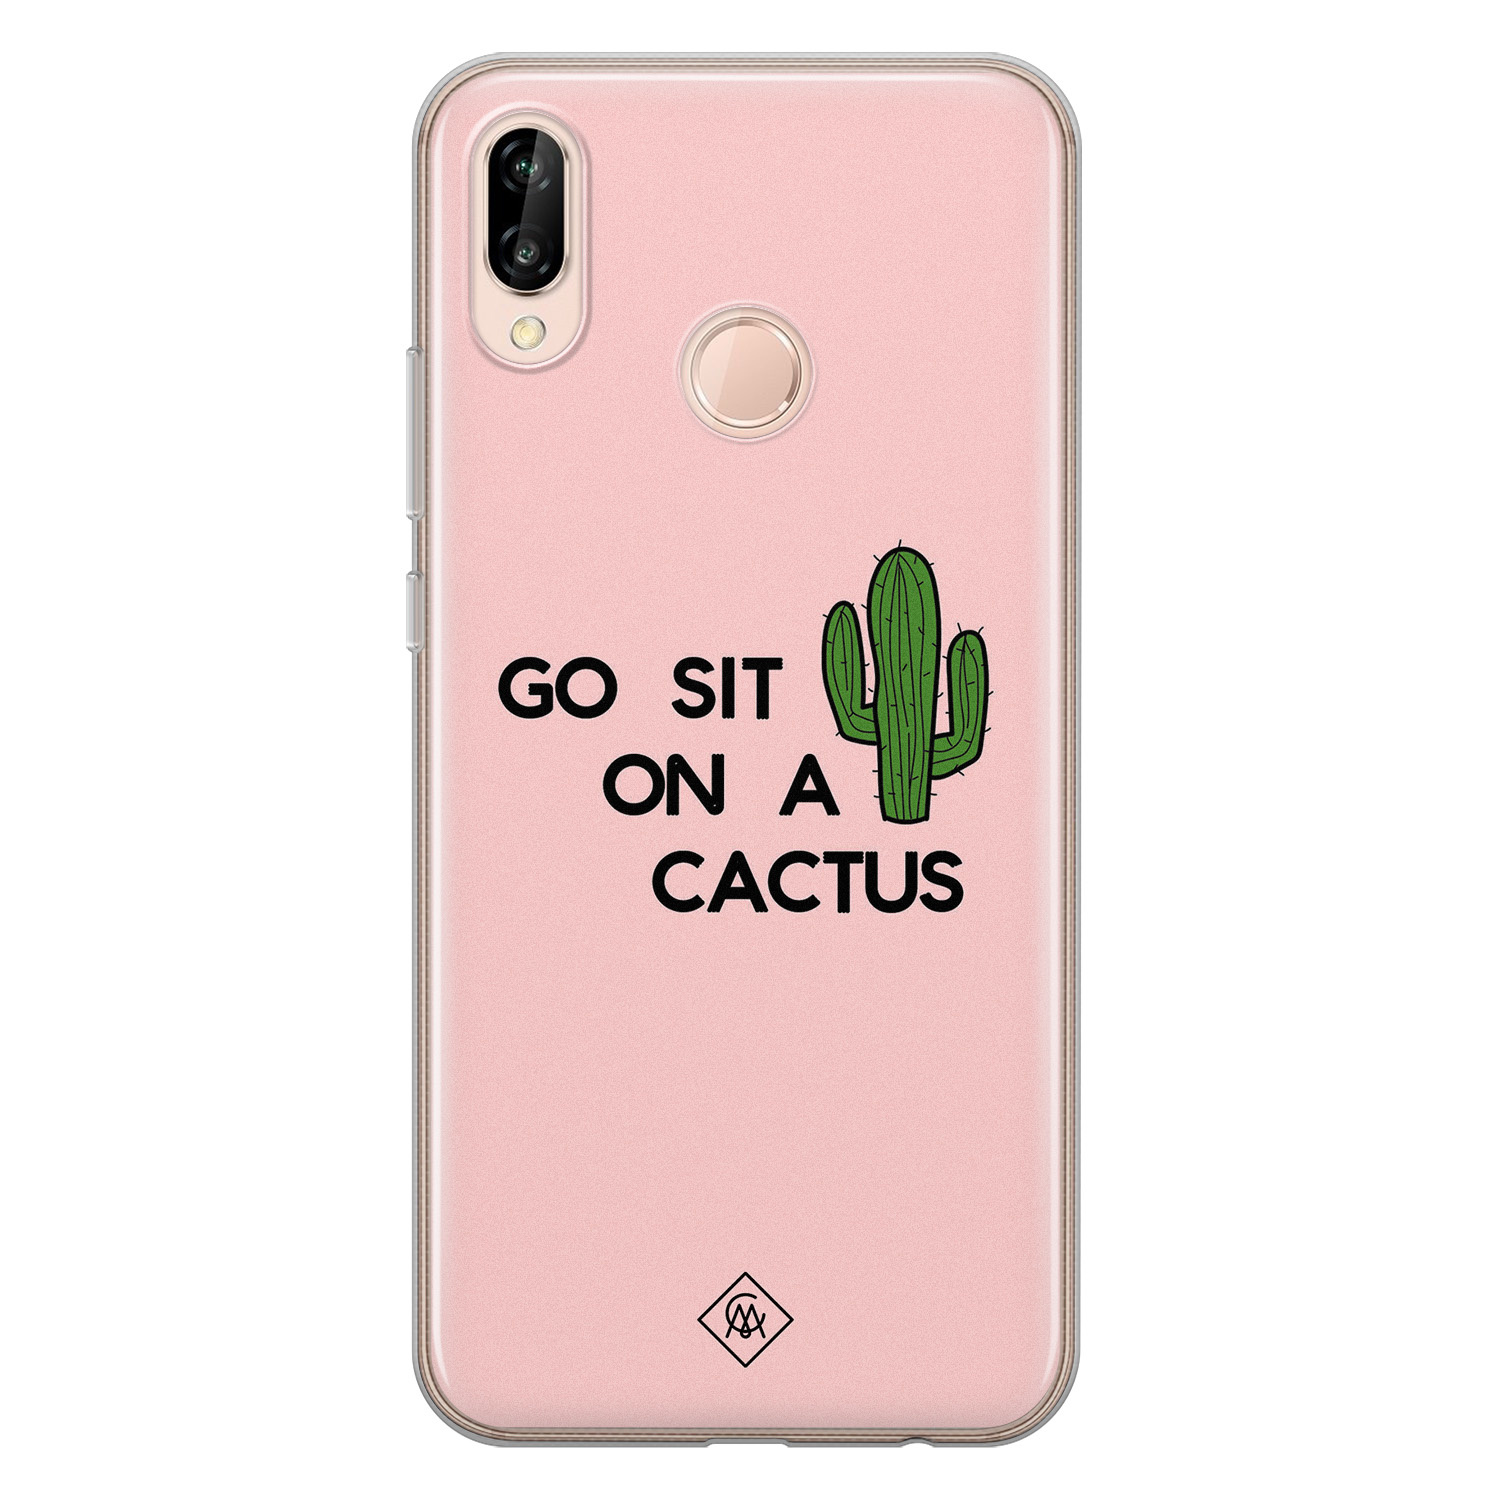 Huawei P20 Lite siliconen hoesje - Go sit on a cactus